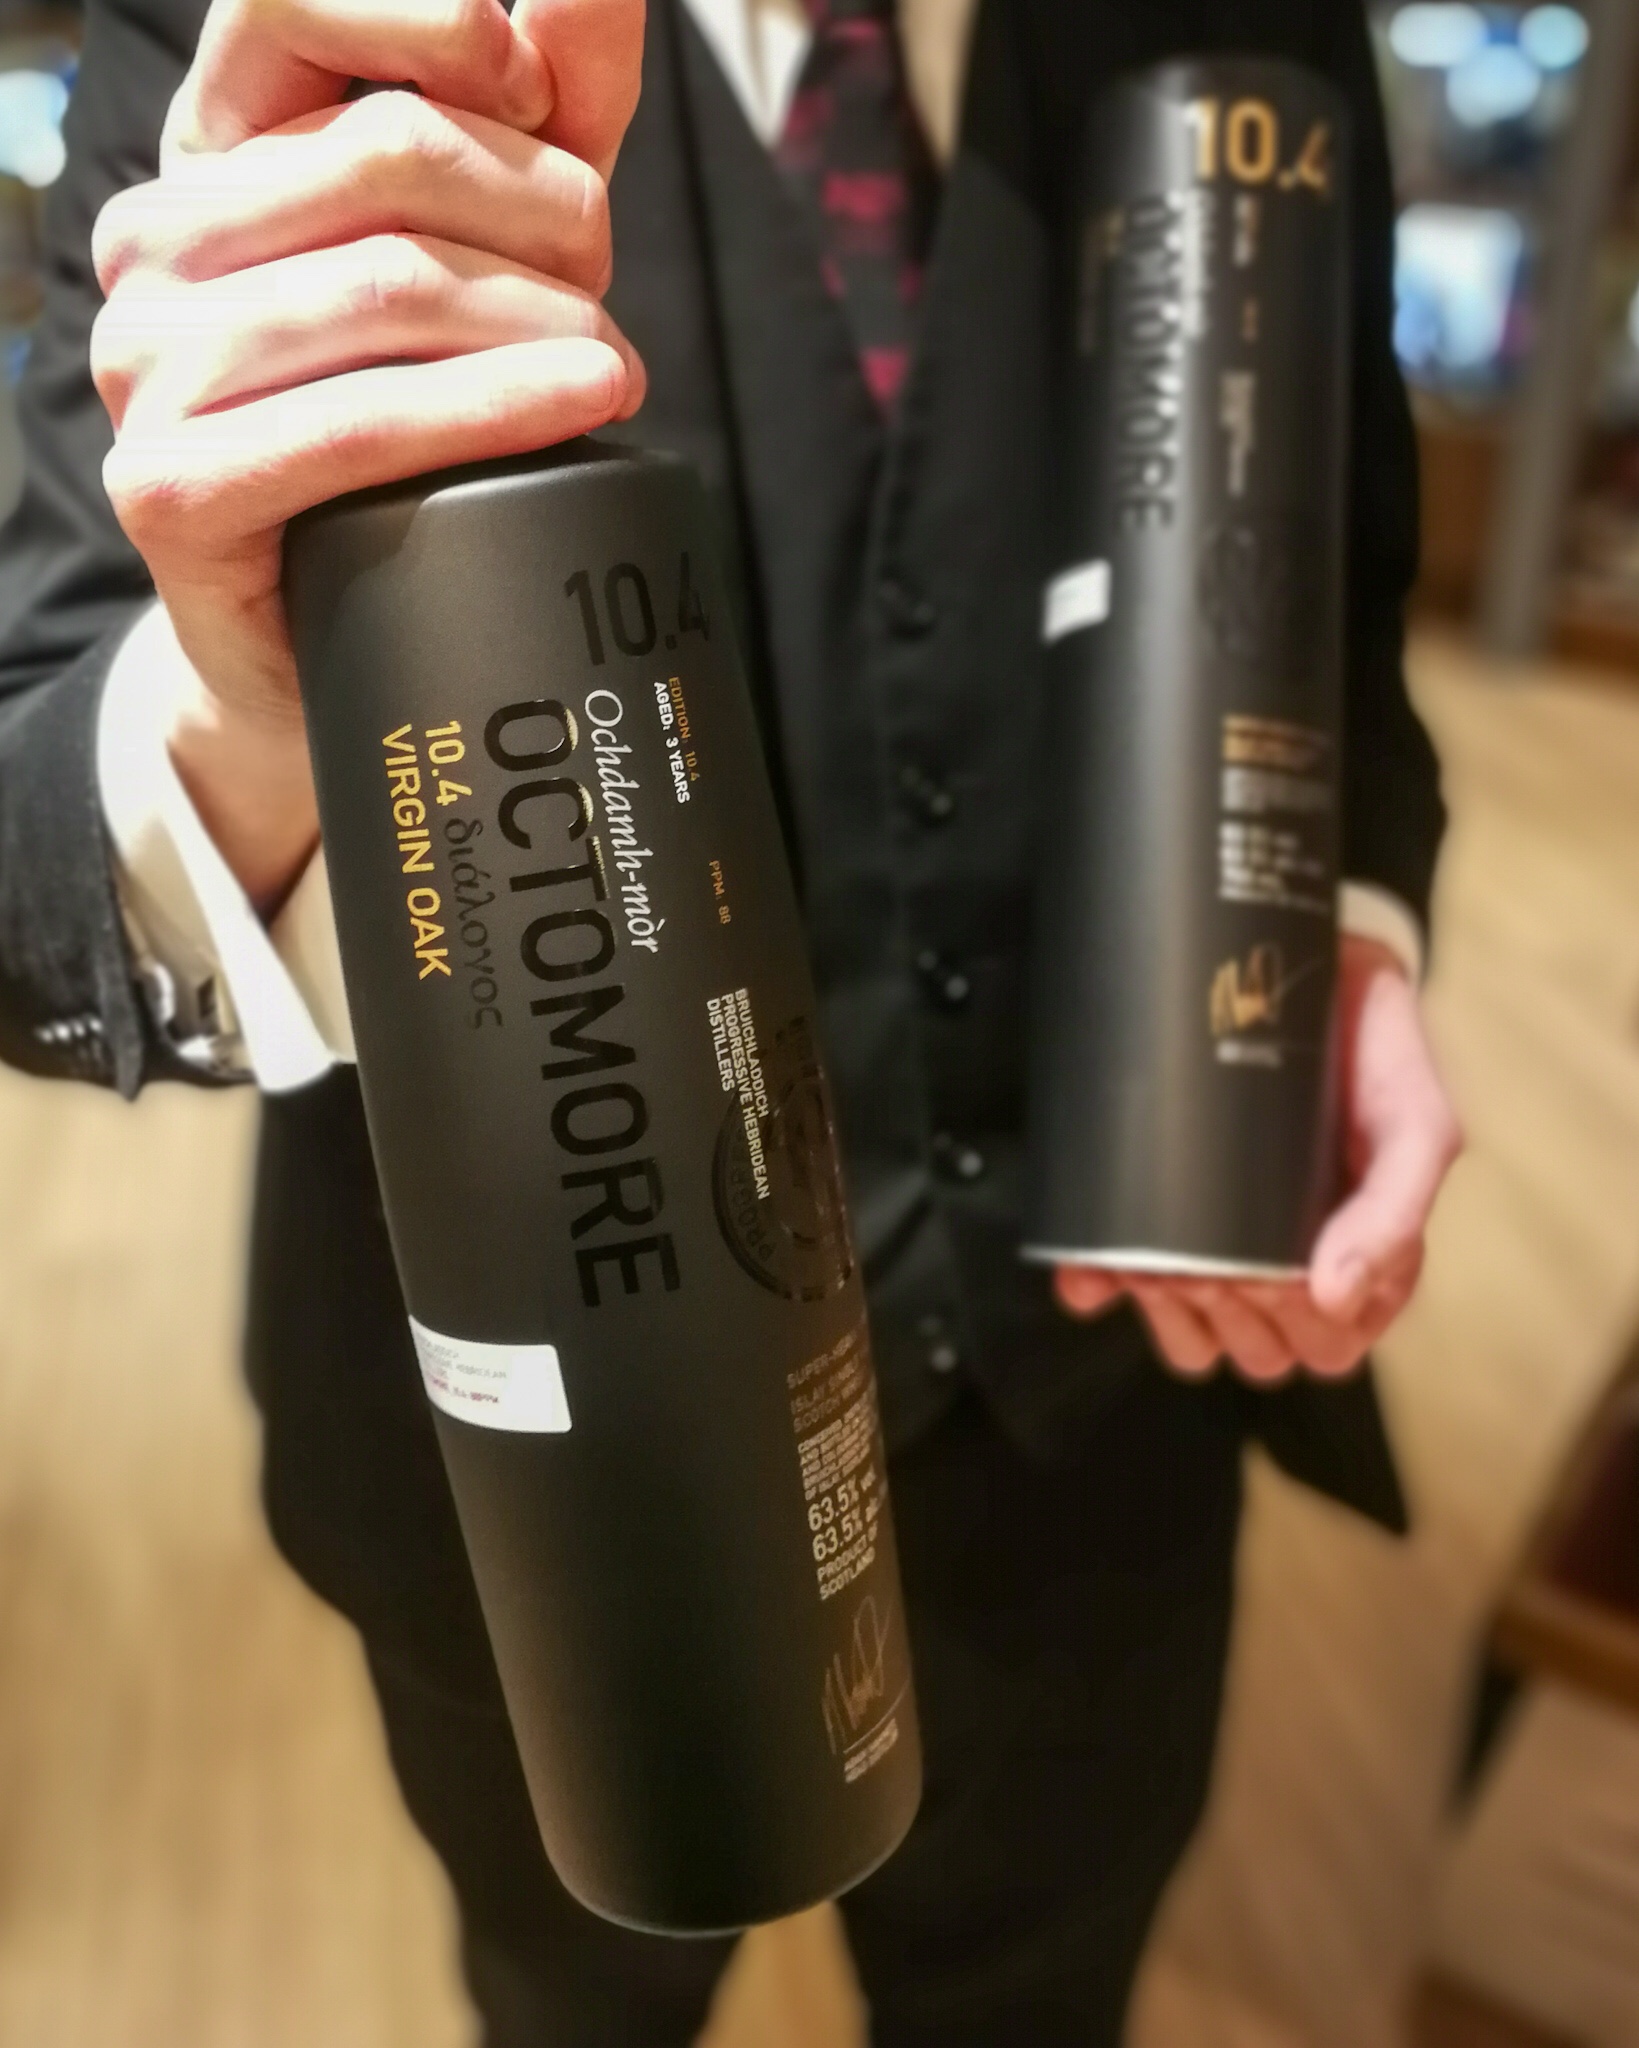 Octomore 10.4 featured image